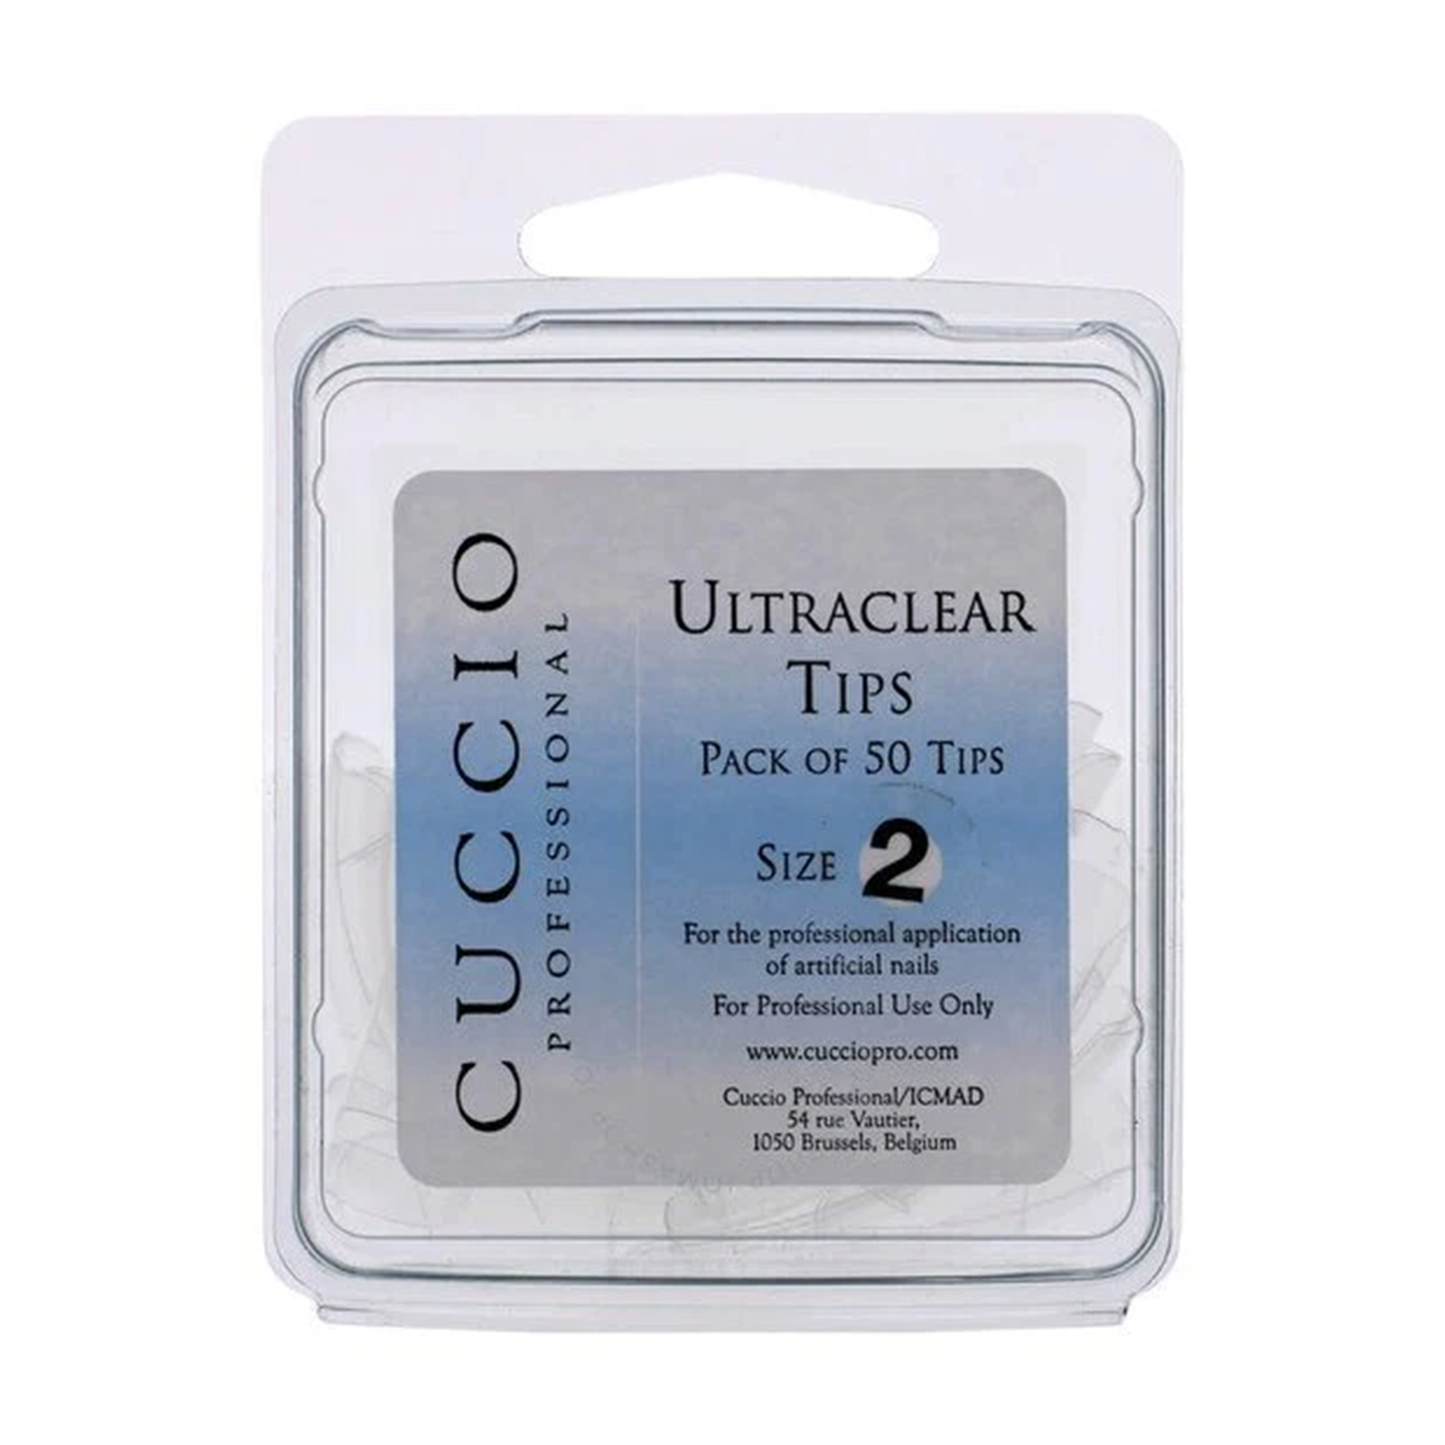 Ultraclear Tips Size 2